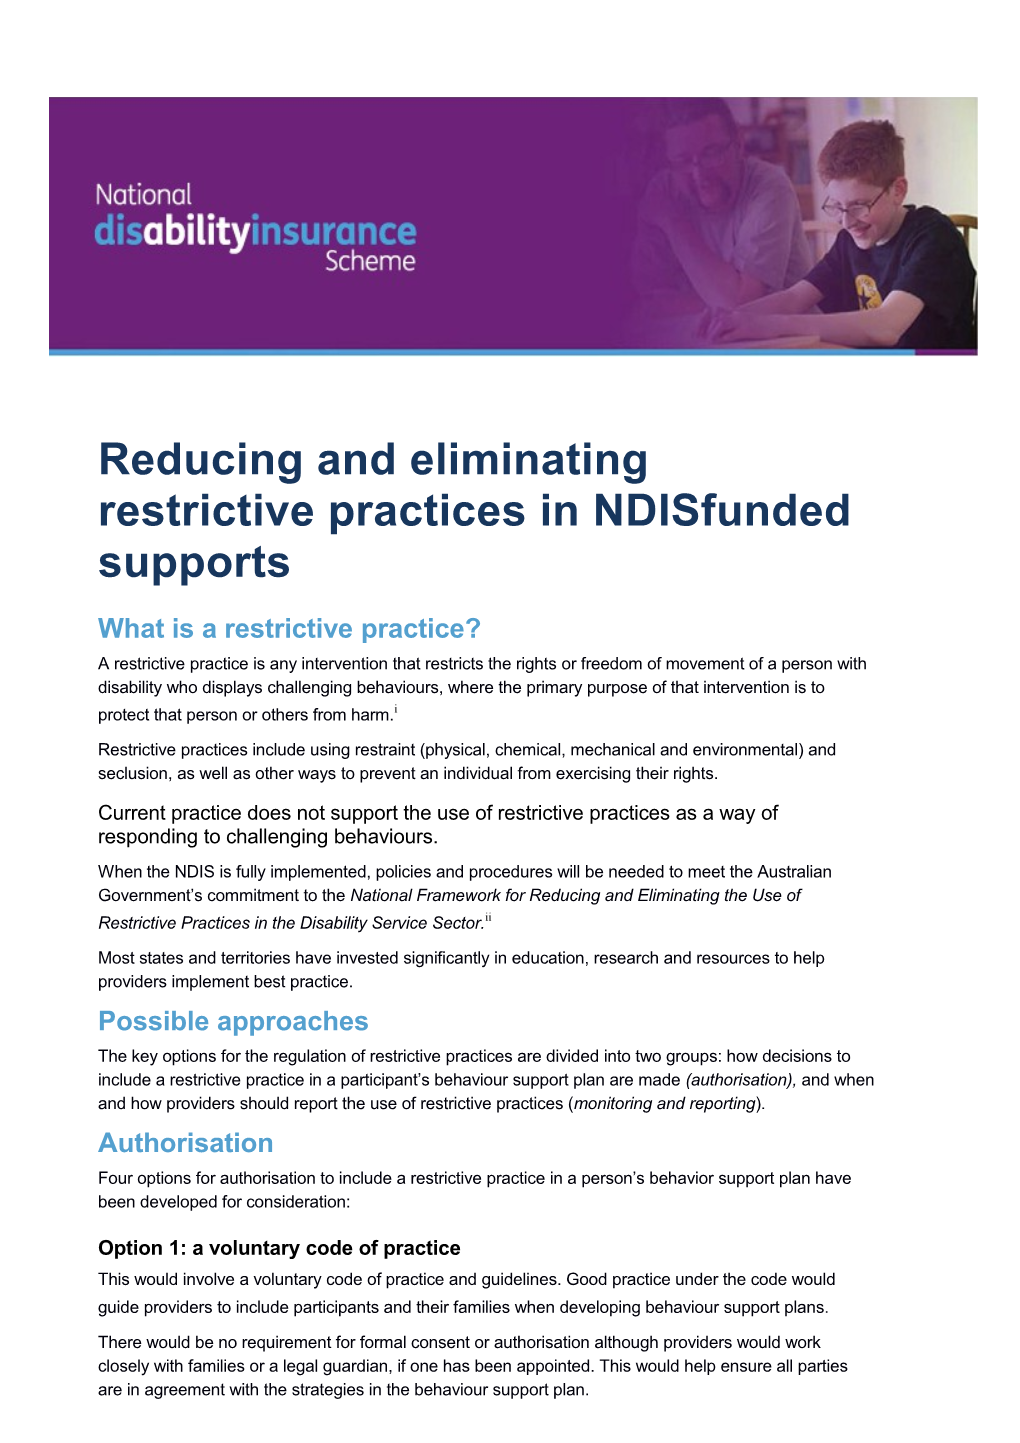 Reducing and Eliminating Restrictive Practices in NDIS Funded Supports